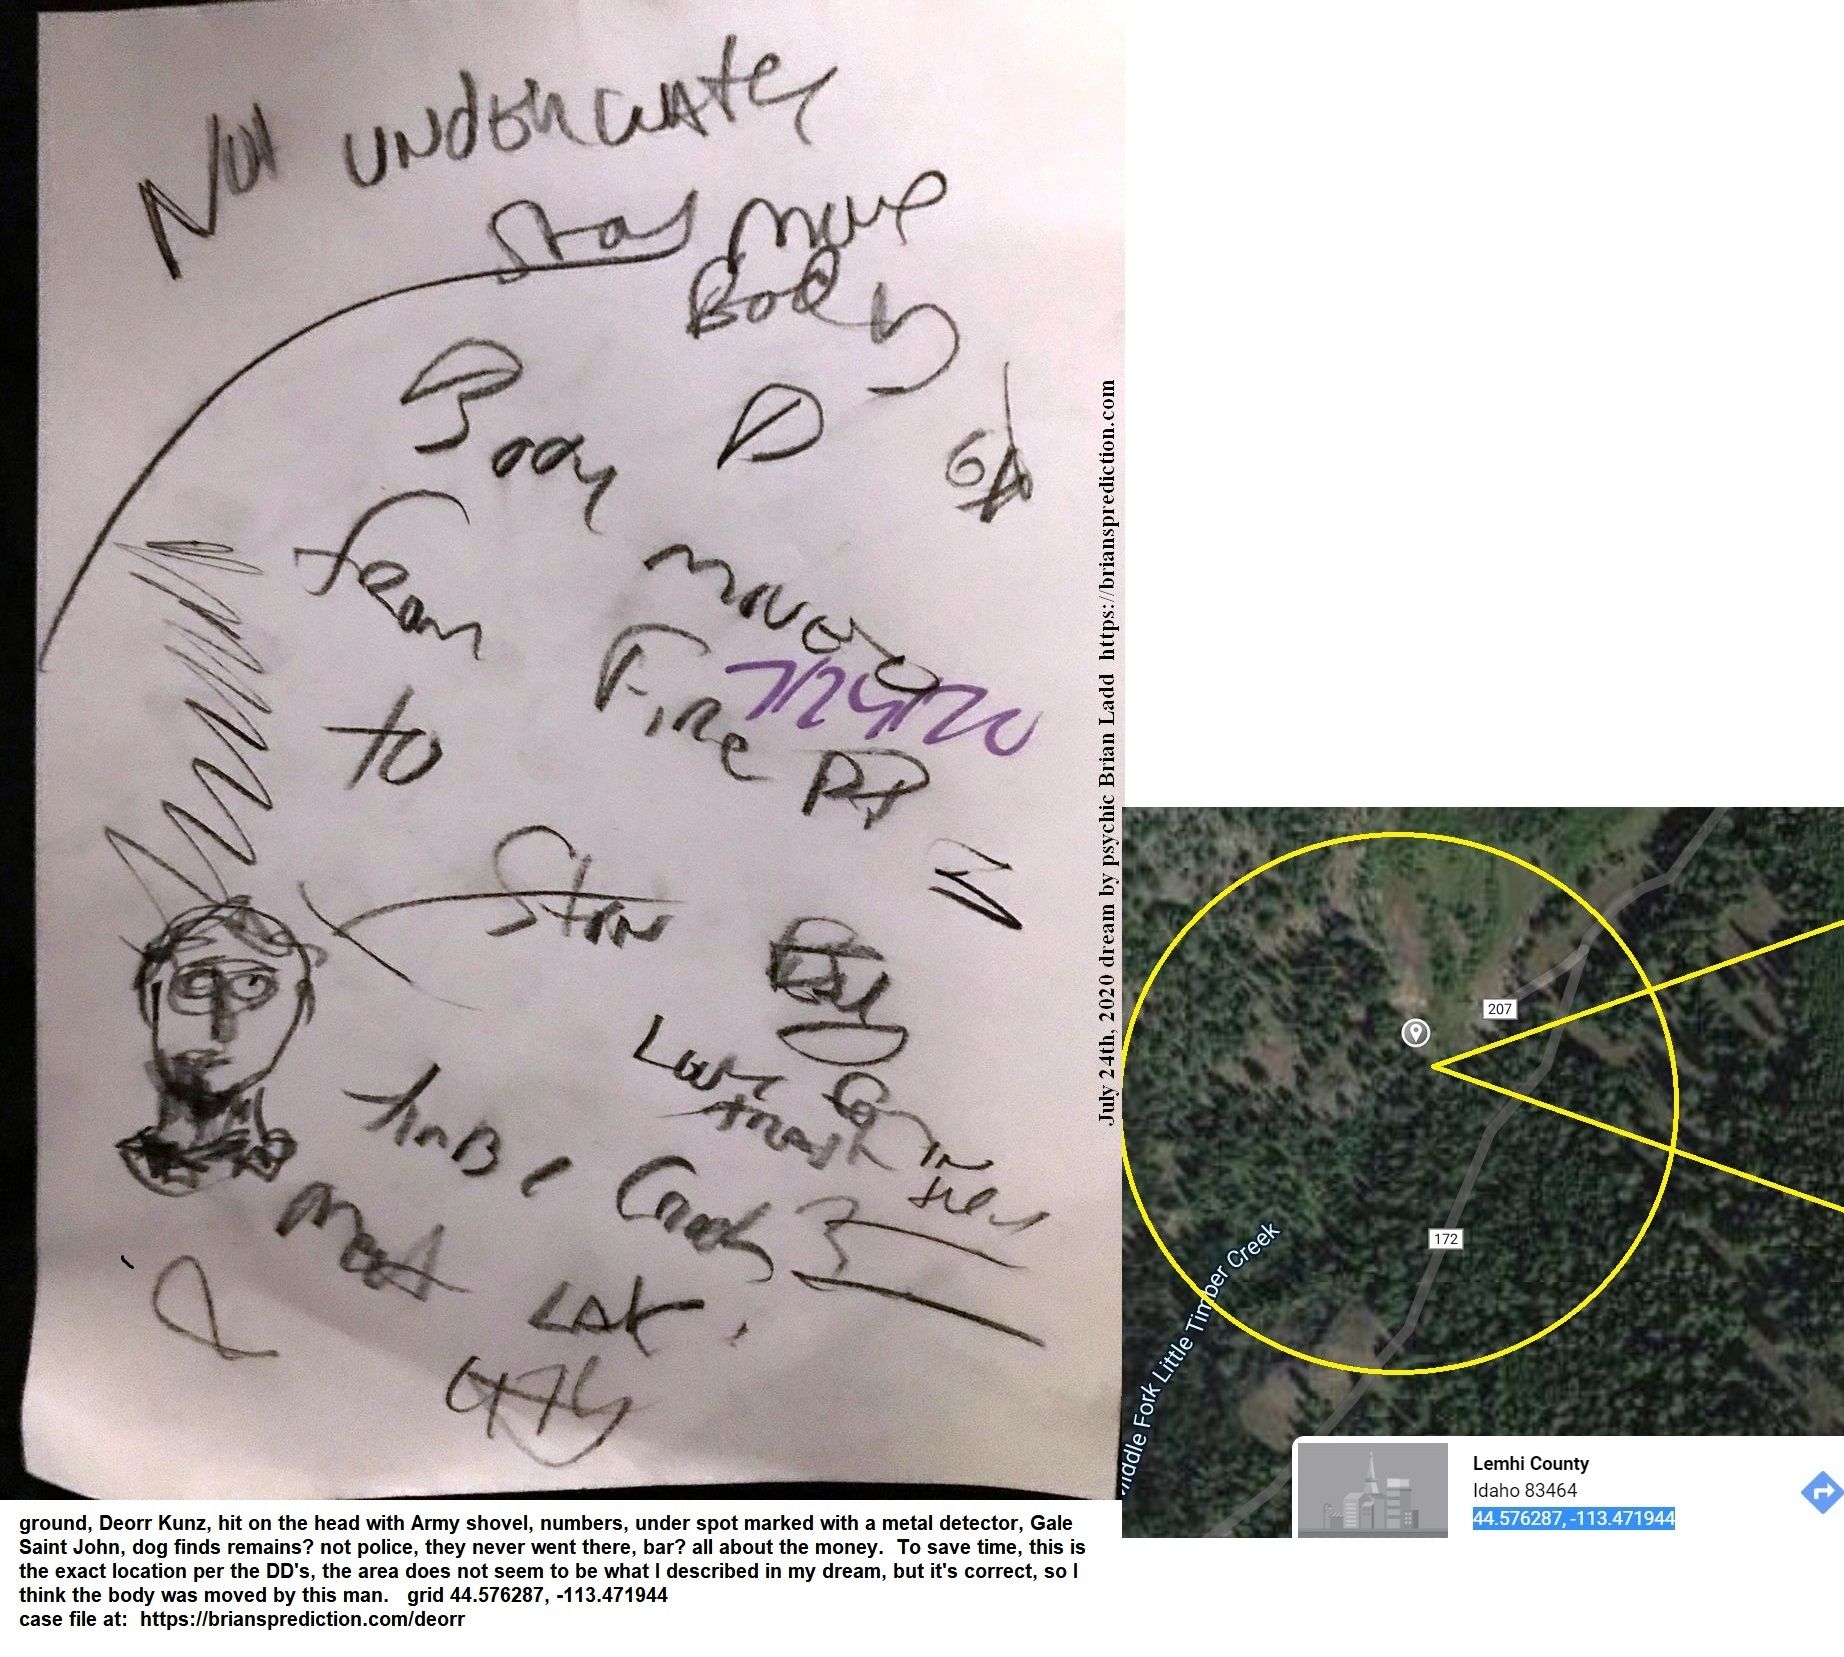 13373 24 July 2020 4 - From 3 Dream Drawing Dated July 24th, 2020  The Remains Of Deorr Kunz Junior Located Just 100 Fee...
From 3 Dream Drawing Dated July 24th, 2020  The Remains Of Deorr Kunz Junior Located Just 100 Feet From Where The 'secret Dig' Happened, By Fire On The Ground, Deorr Kunz, Hit On The Head With Army Shovel, Numbers, Under Spot Marked With A Metal Detector, Gale Saint John, Dog Finds Remains? Not Police, They Never Went There, Bar? All About The Money.  To Save Time, This Is The Exact Location Per The Dd'S, The Area Does Not Seem To Be What I Described In My Dream, But It'S Correct, So I Think The Body Was Moved By This Man.  Grid 44.576287, -113.471944  Case File At:   https://briansprediction.com/Deorr
